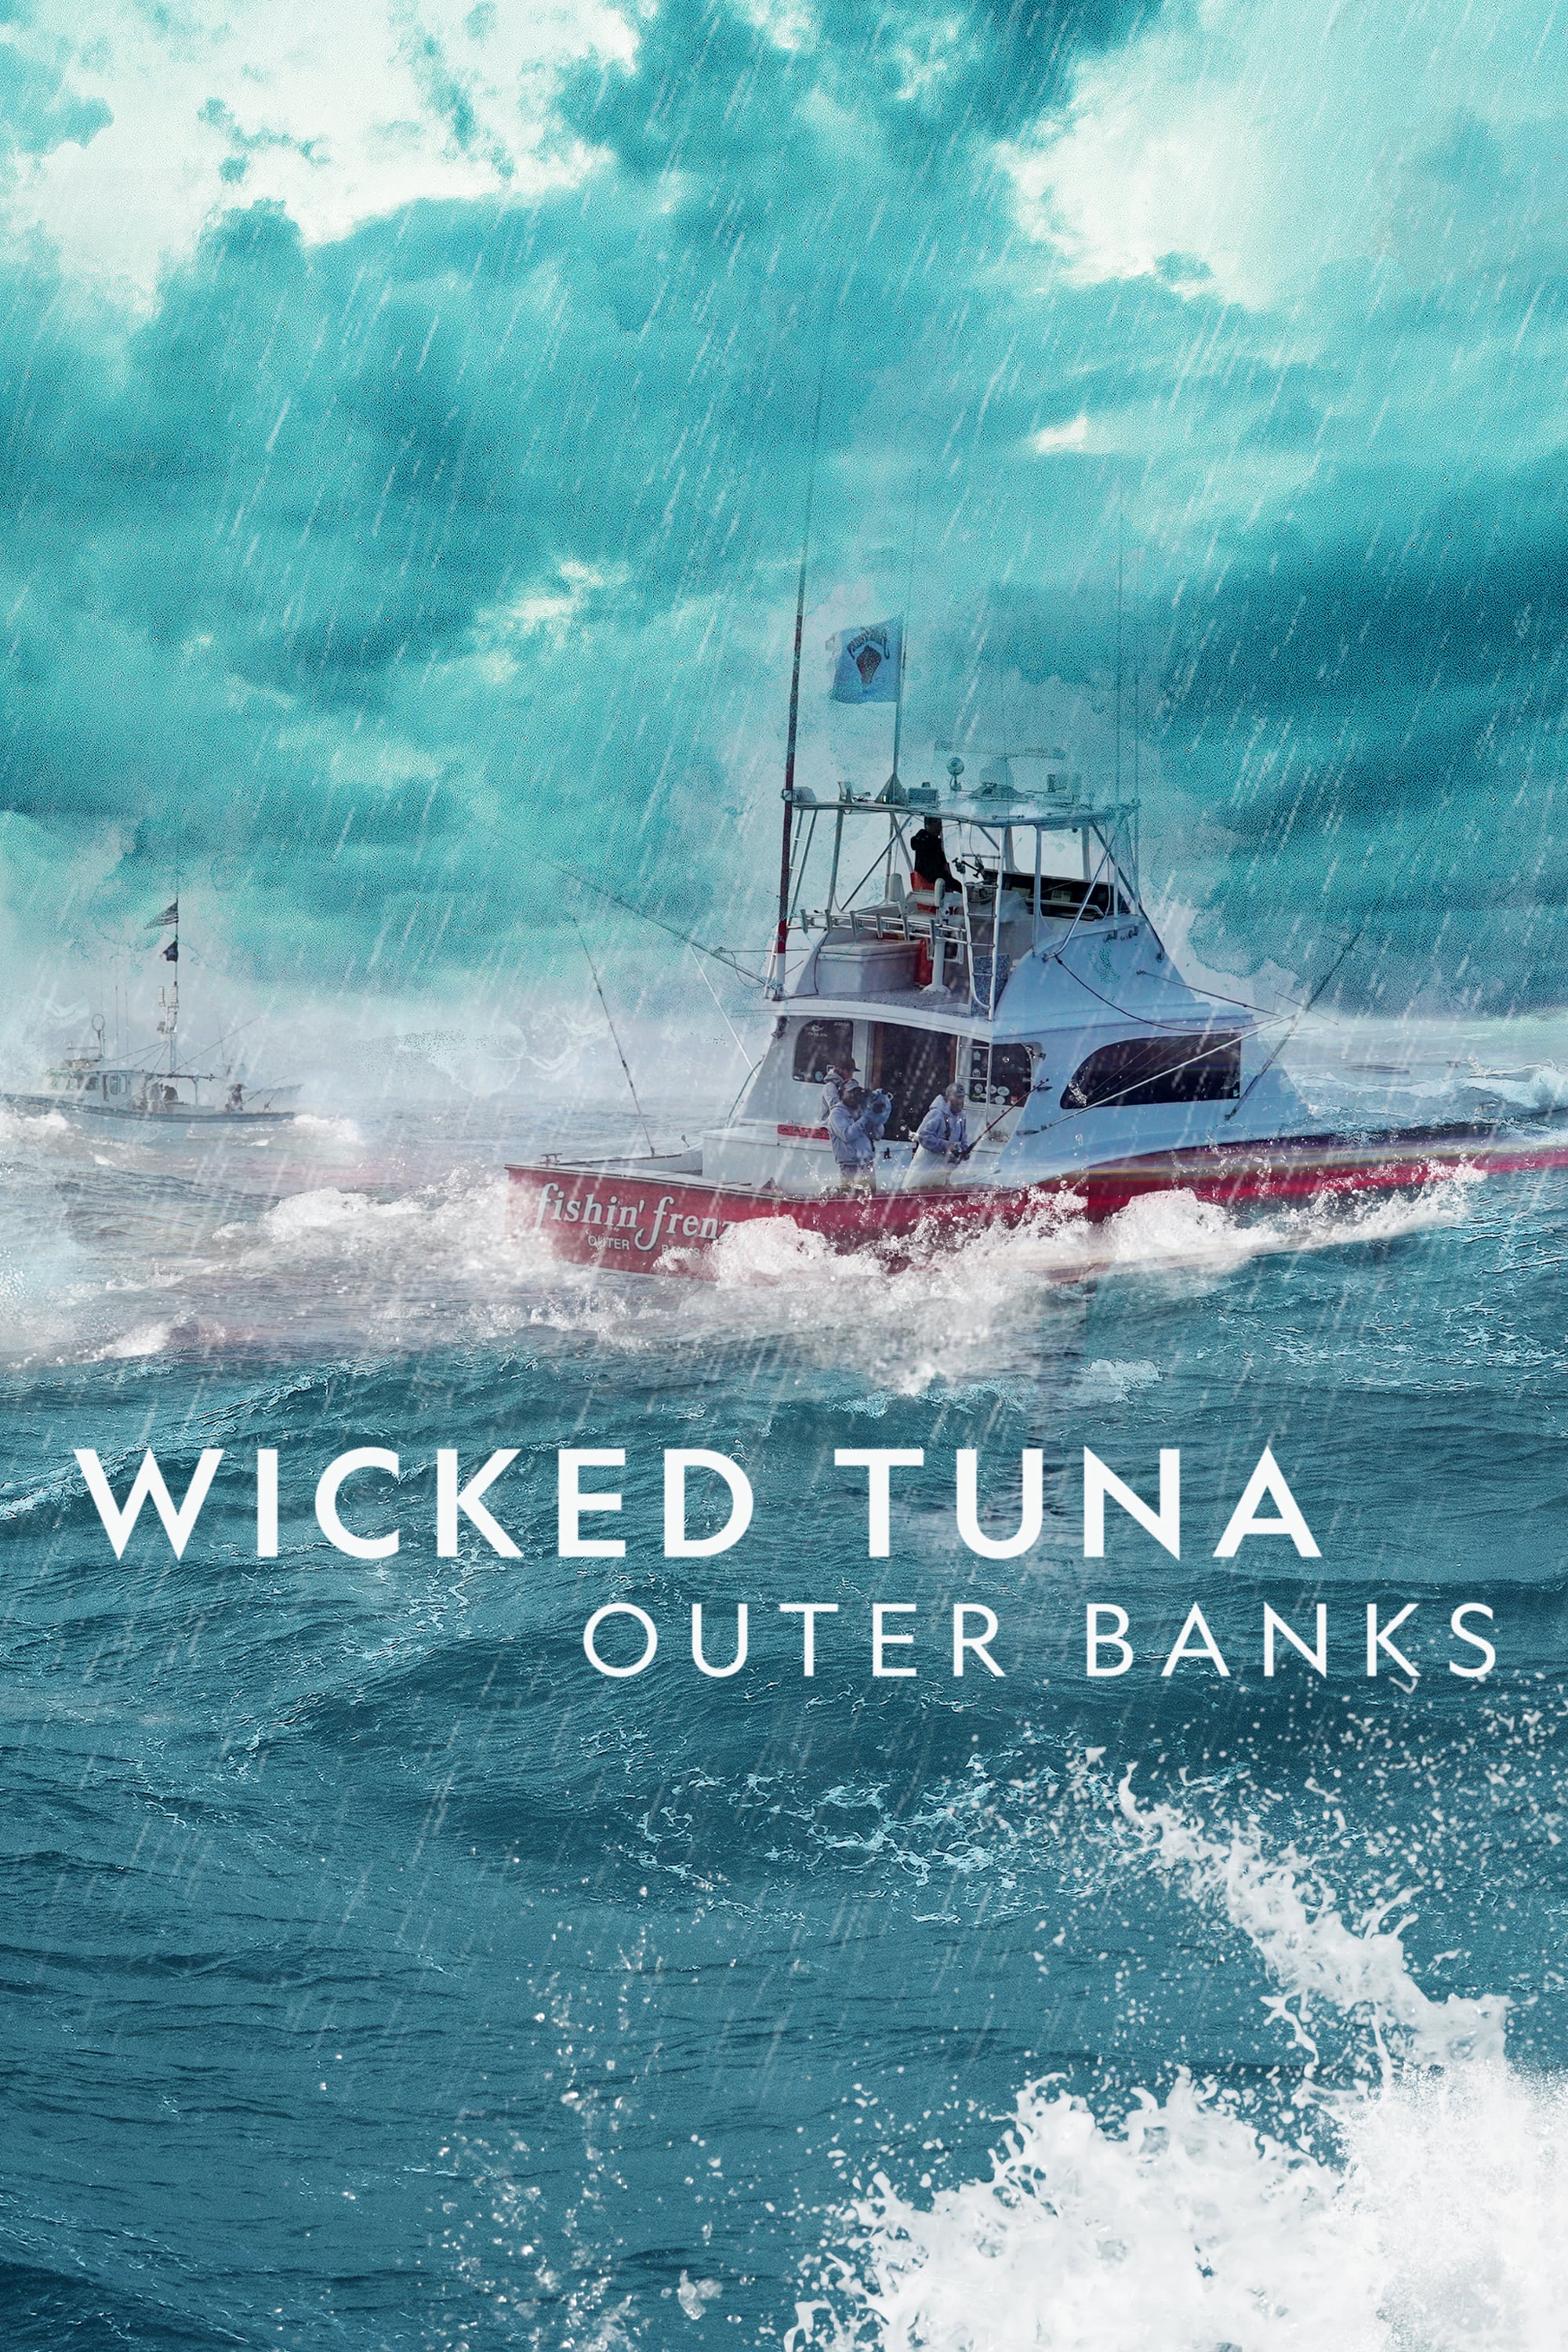 Wicked Tuna Outer Banks Picture Image Abyss